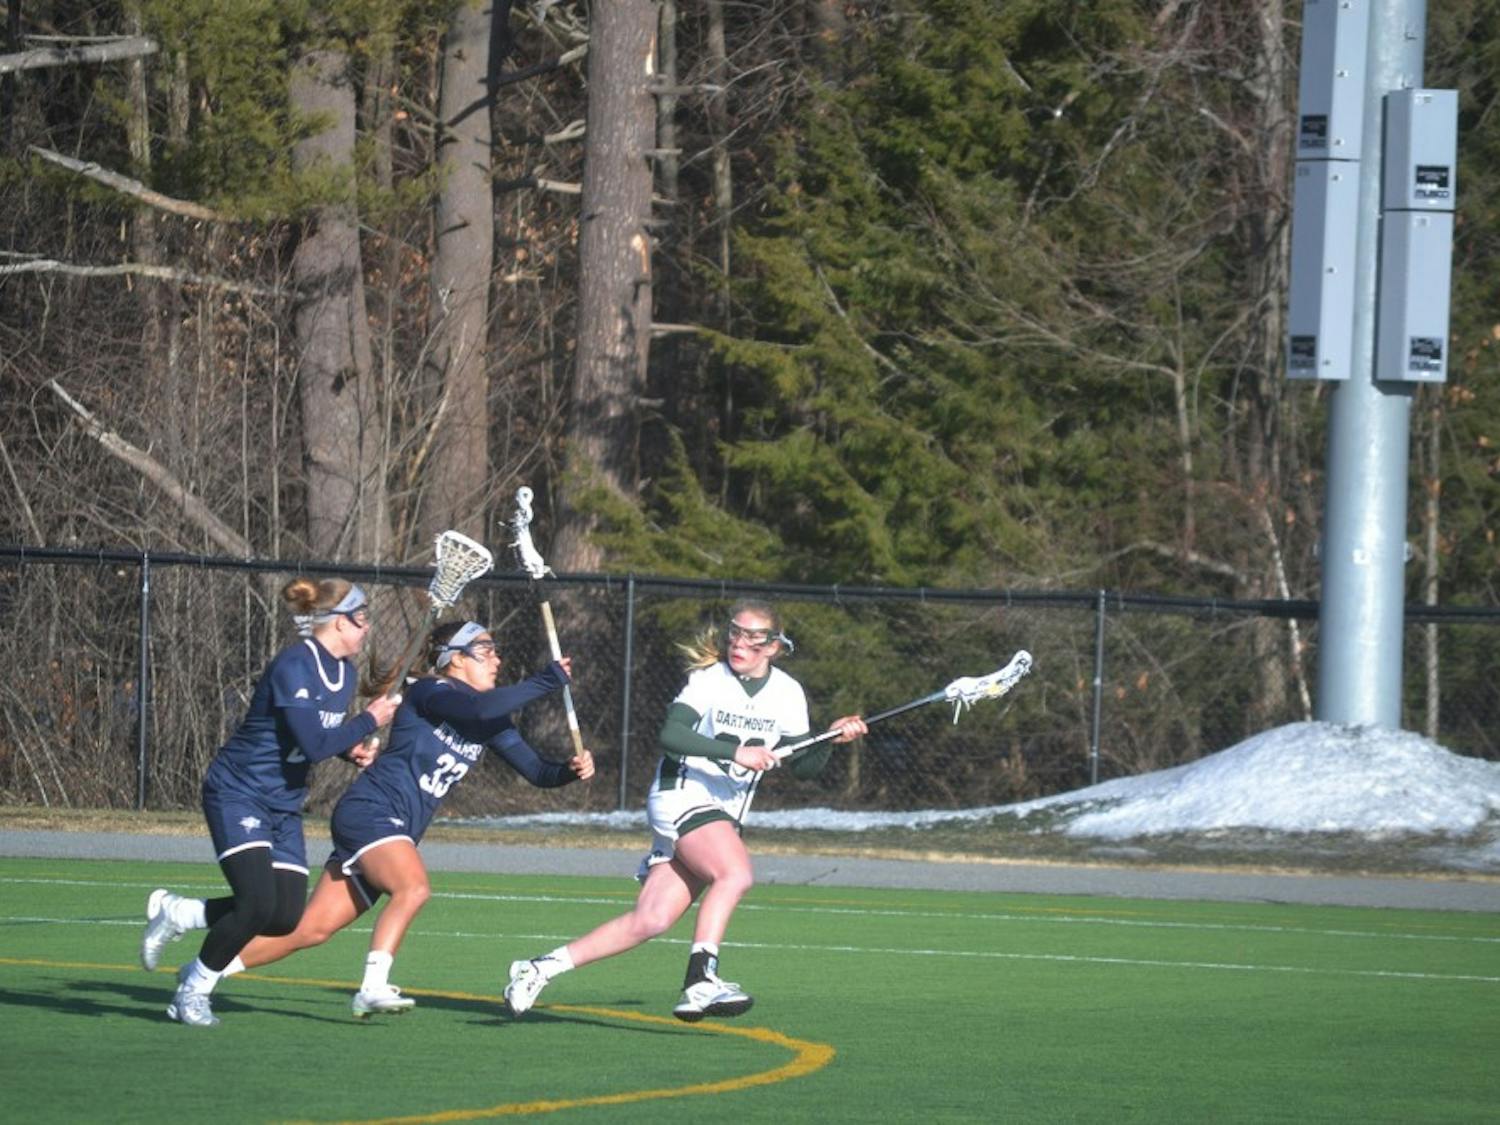 Nationally, men's and women's&nbsp;Division I&nbsp;lacrosse teams have participated in early recruiting.